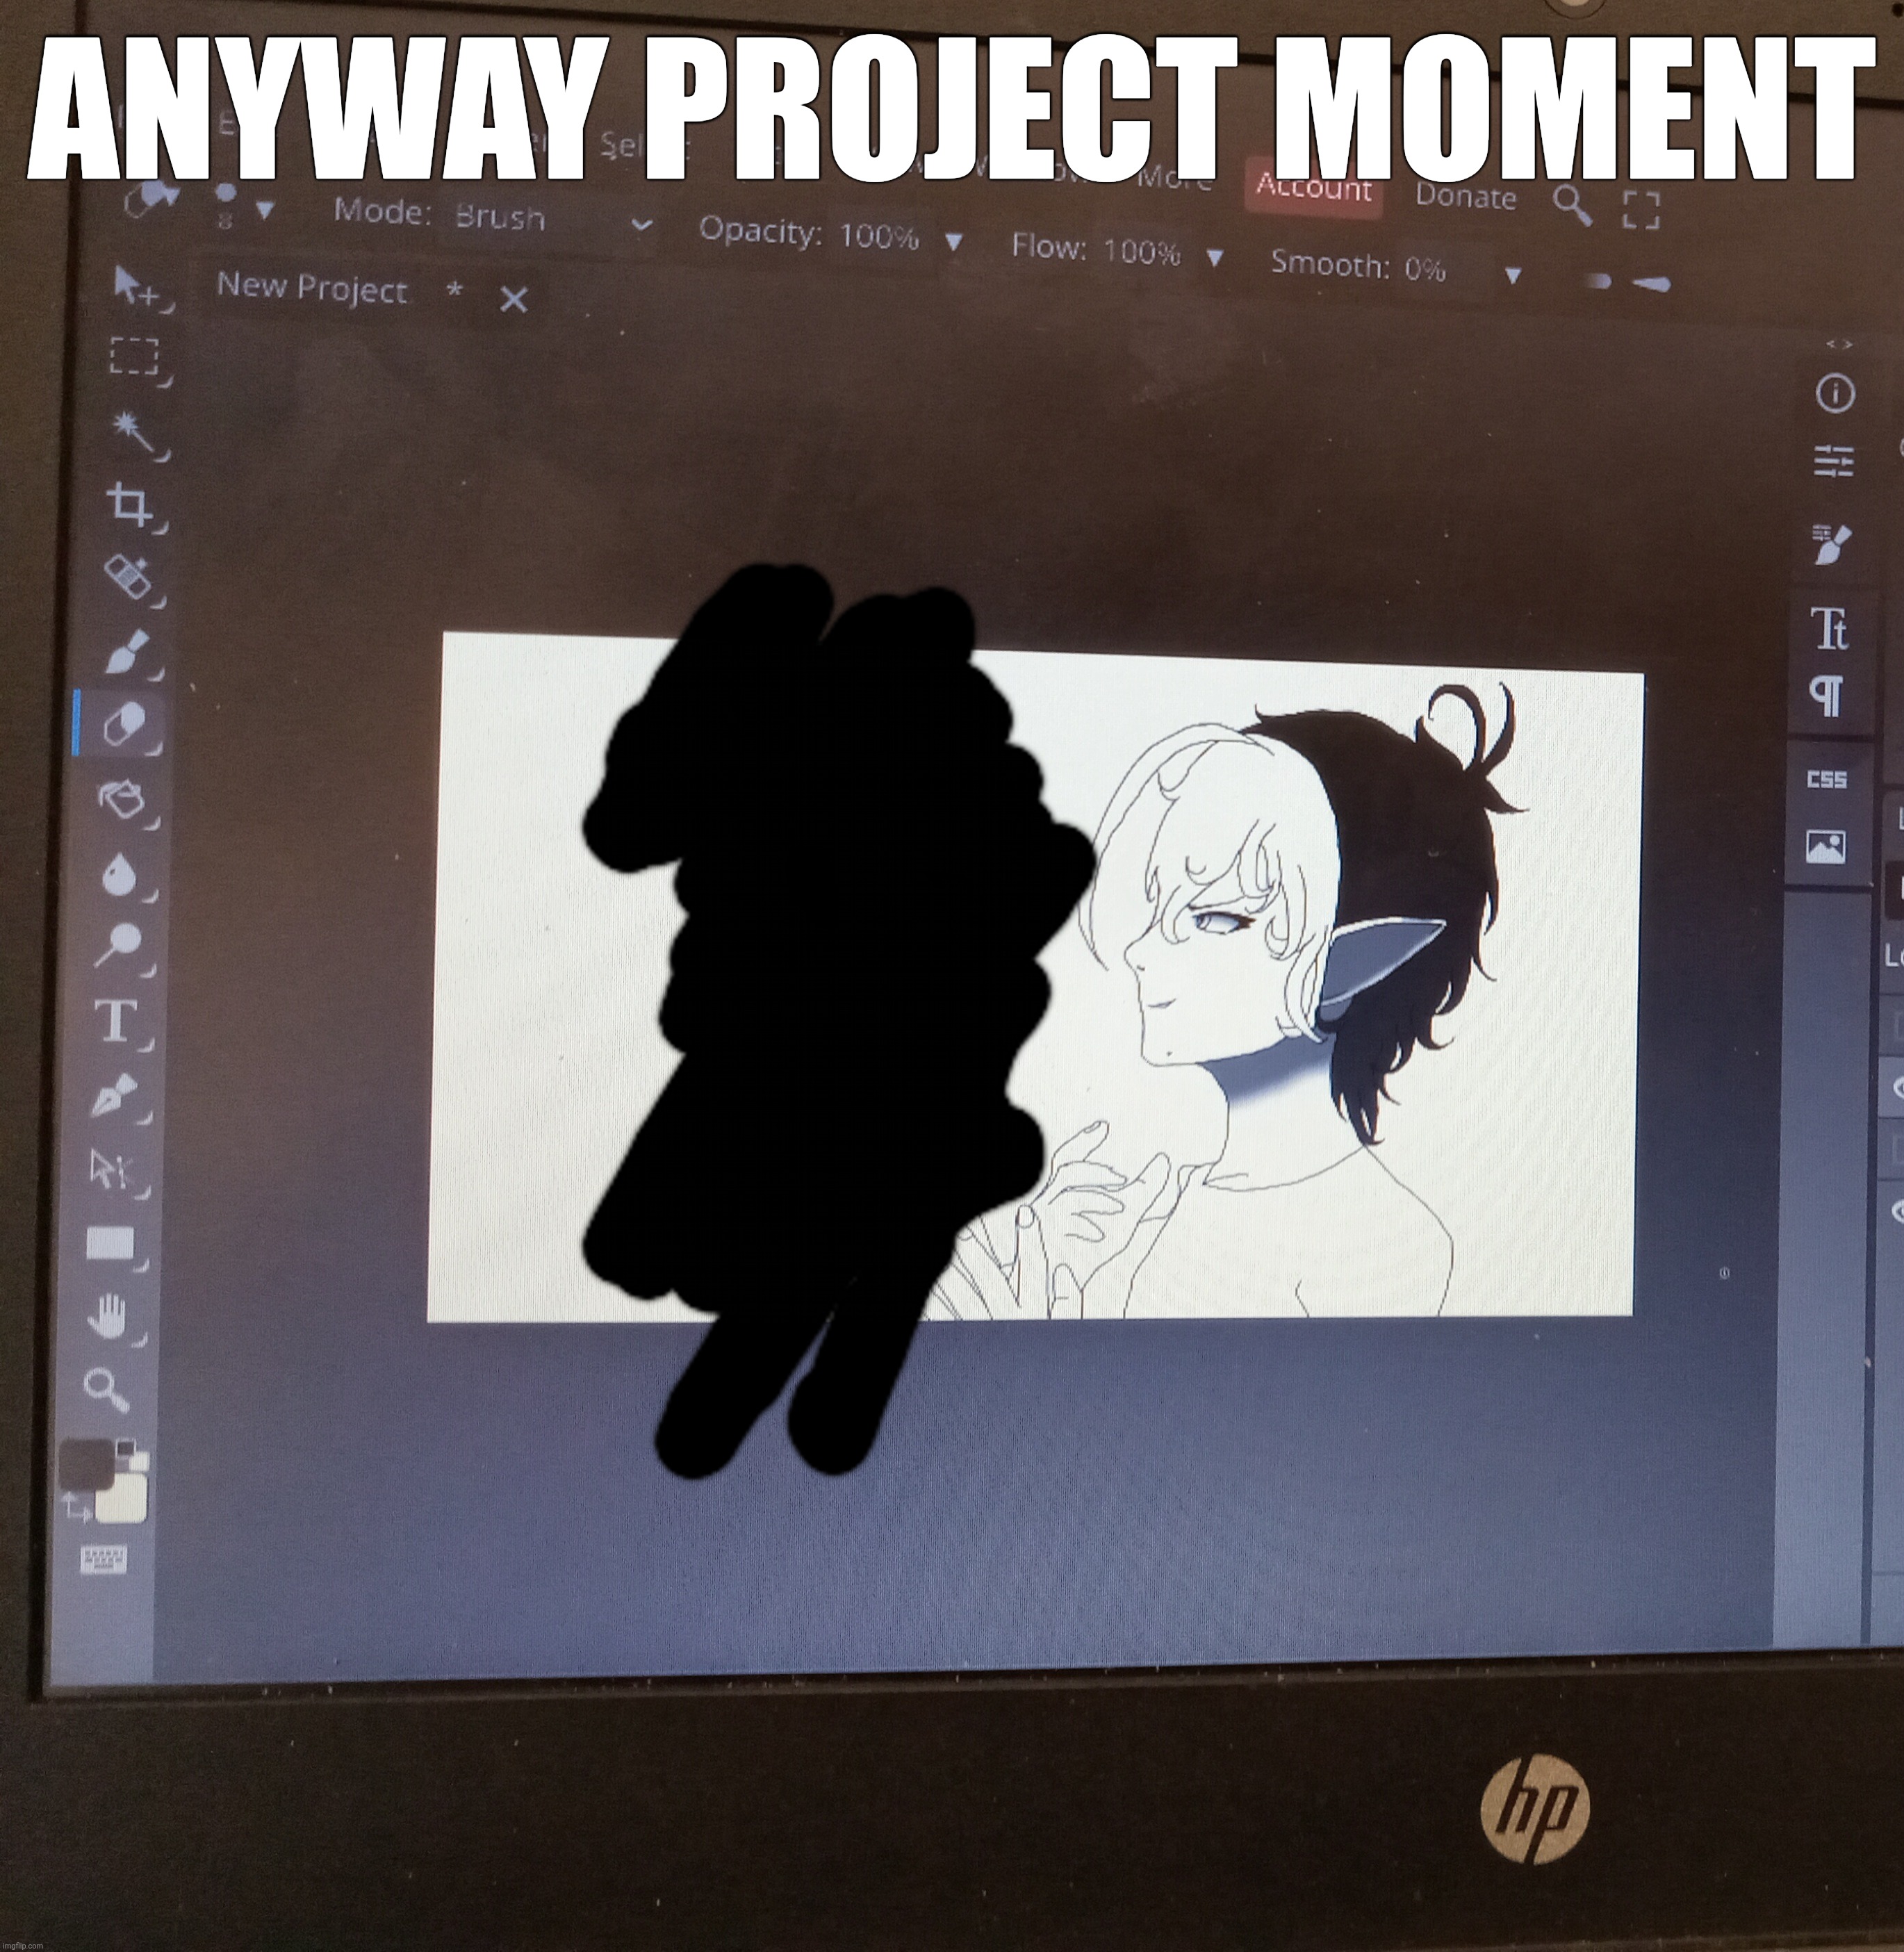 ANYWAY PROJECT MOMENT | made w/ Imgflip meme maker